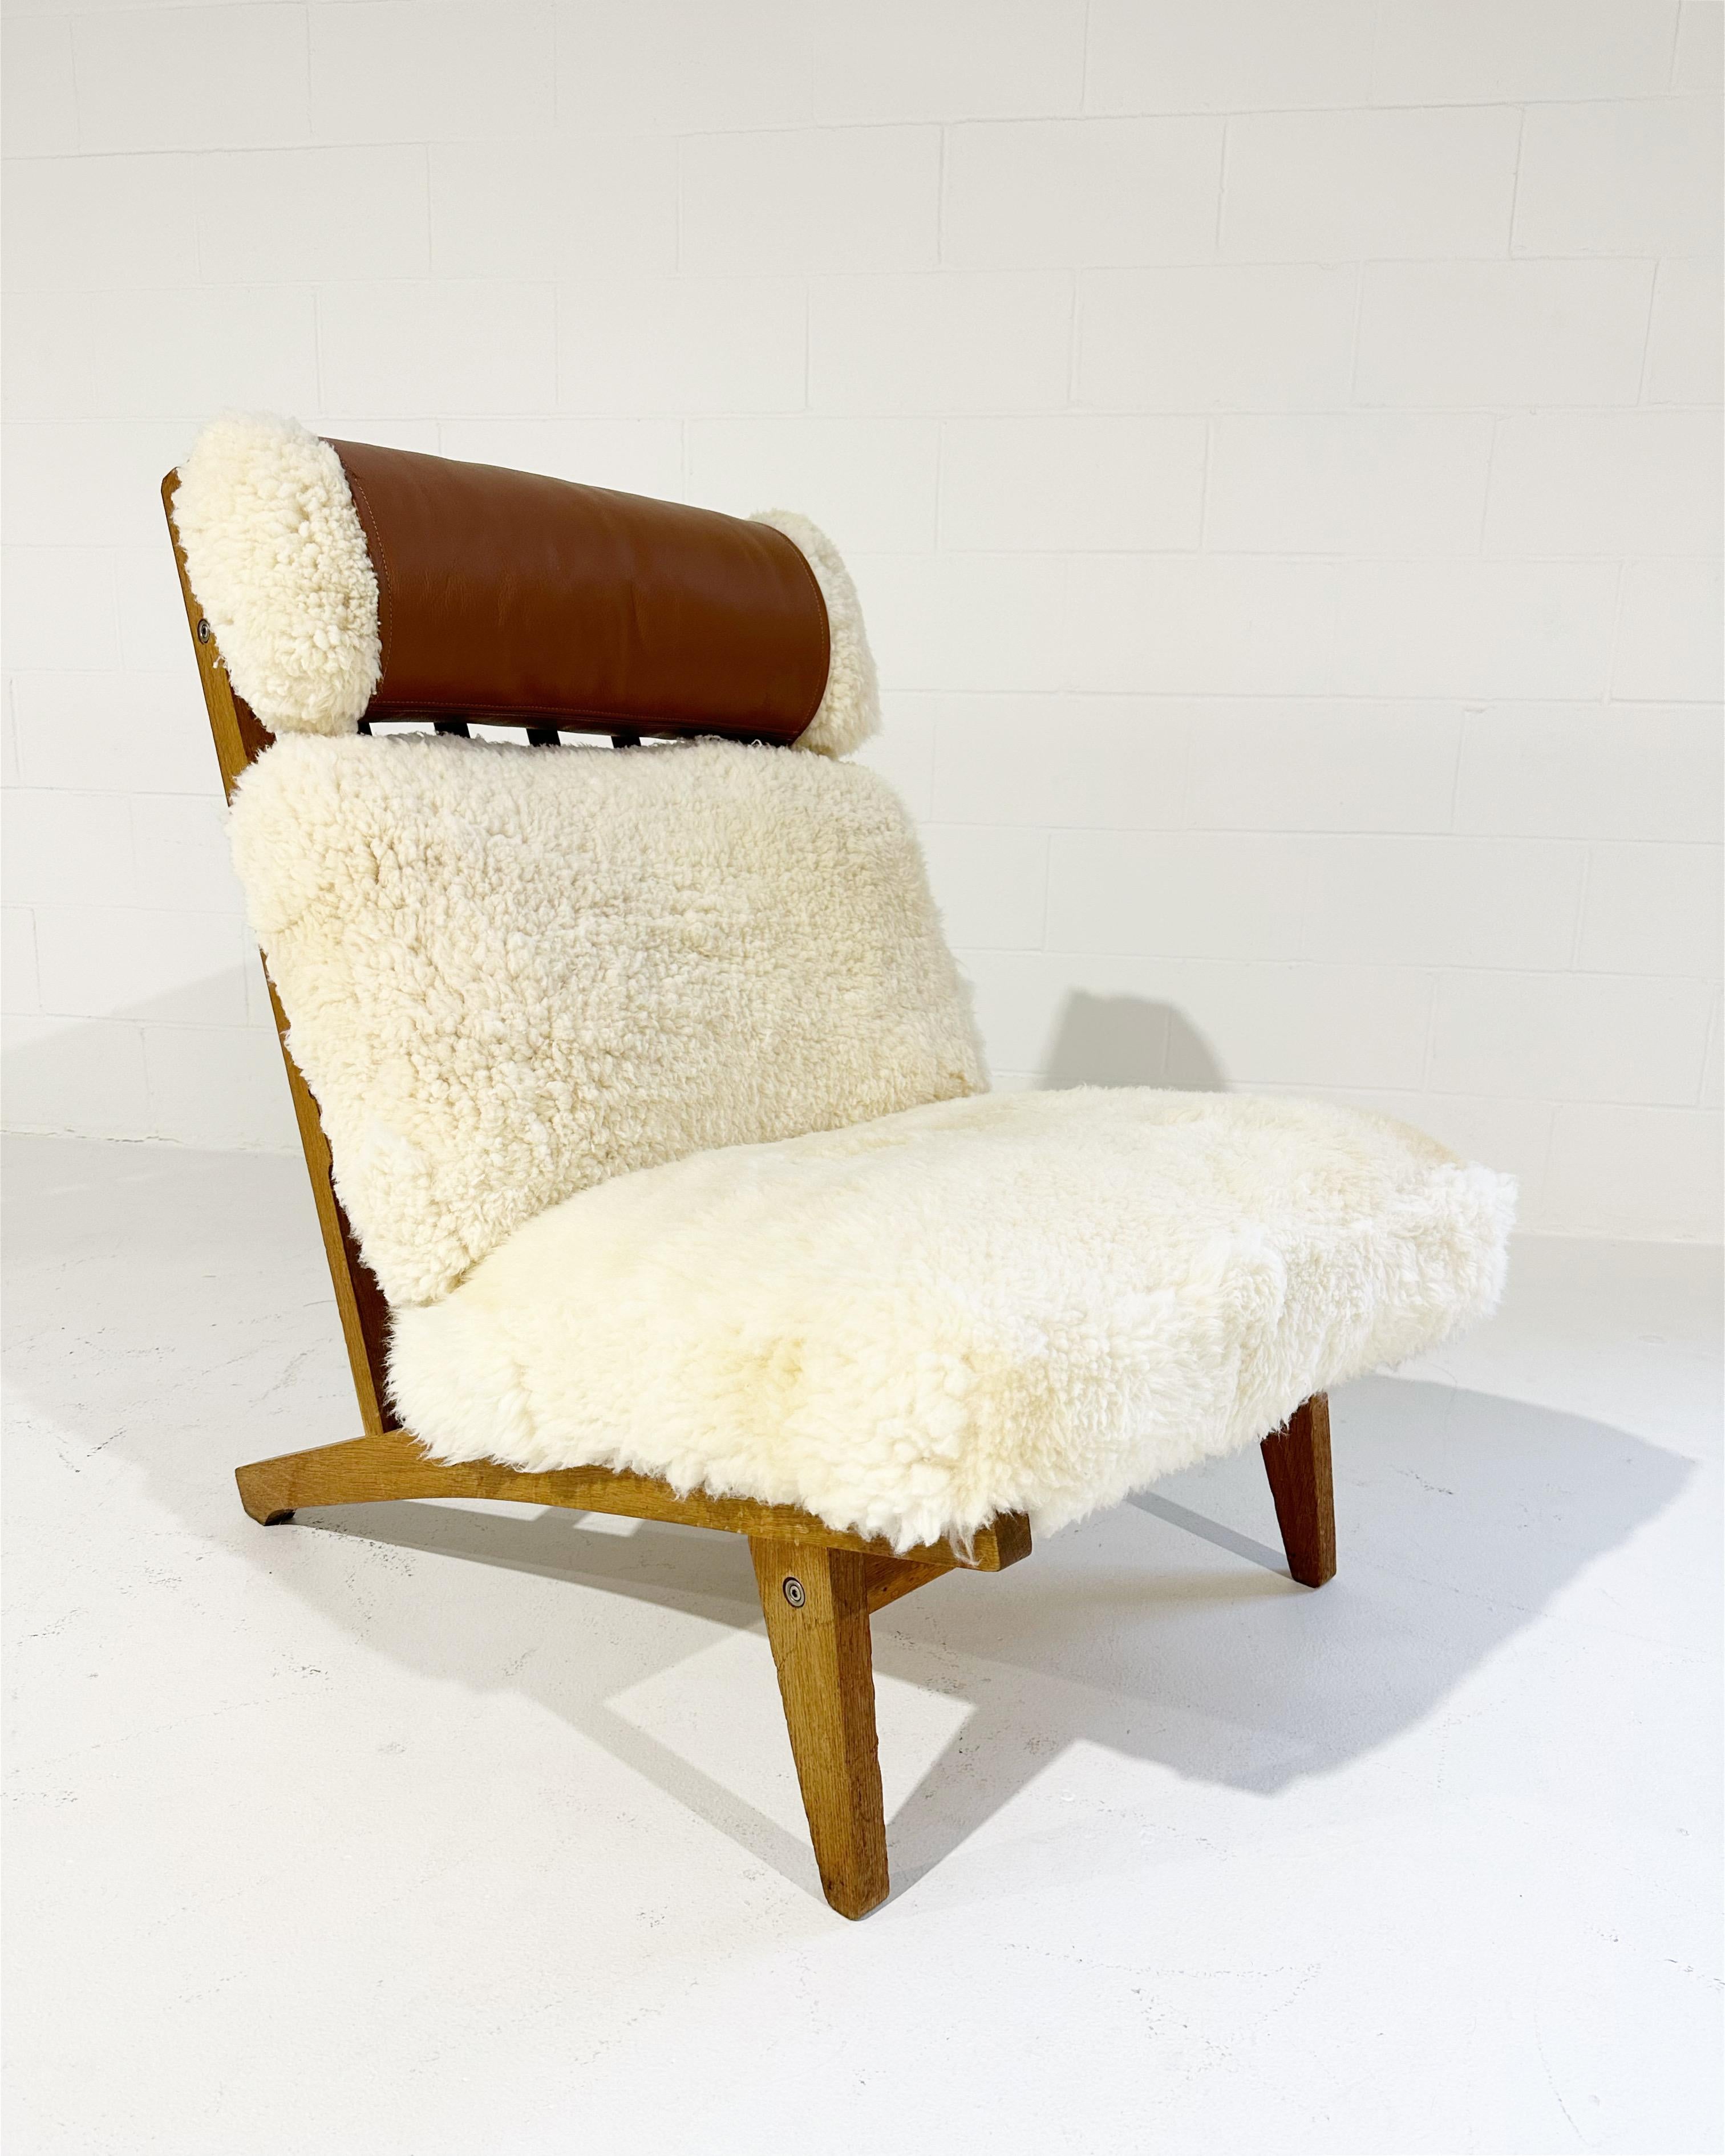 With gorgeous patinaed oak, custom California sheepskin cushions, and a finishing touch of beautiful Loro Piana leather, this Hans Wegner lounge chair is incredible. And so comfortable. 